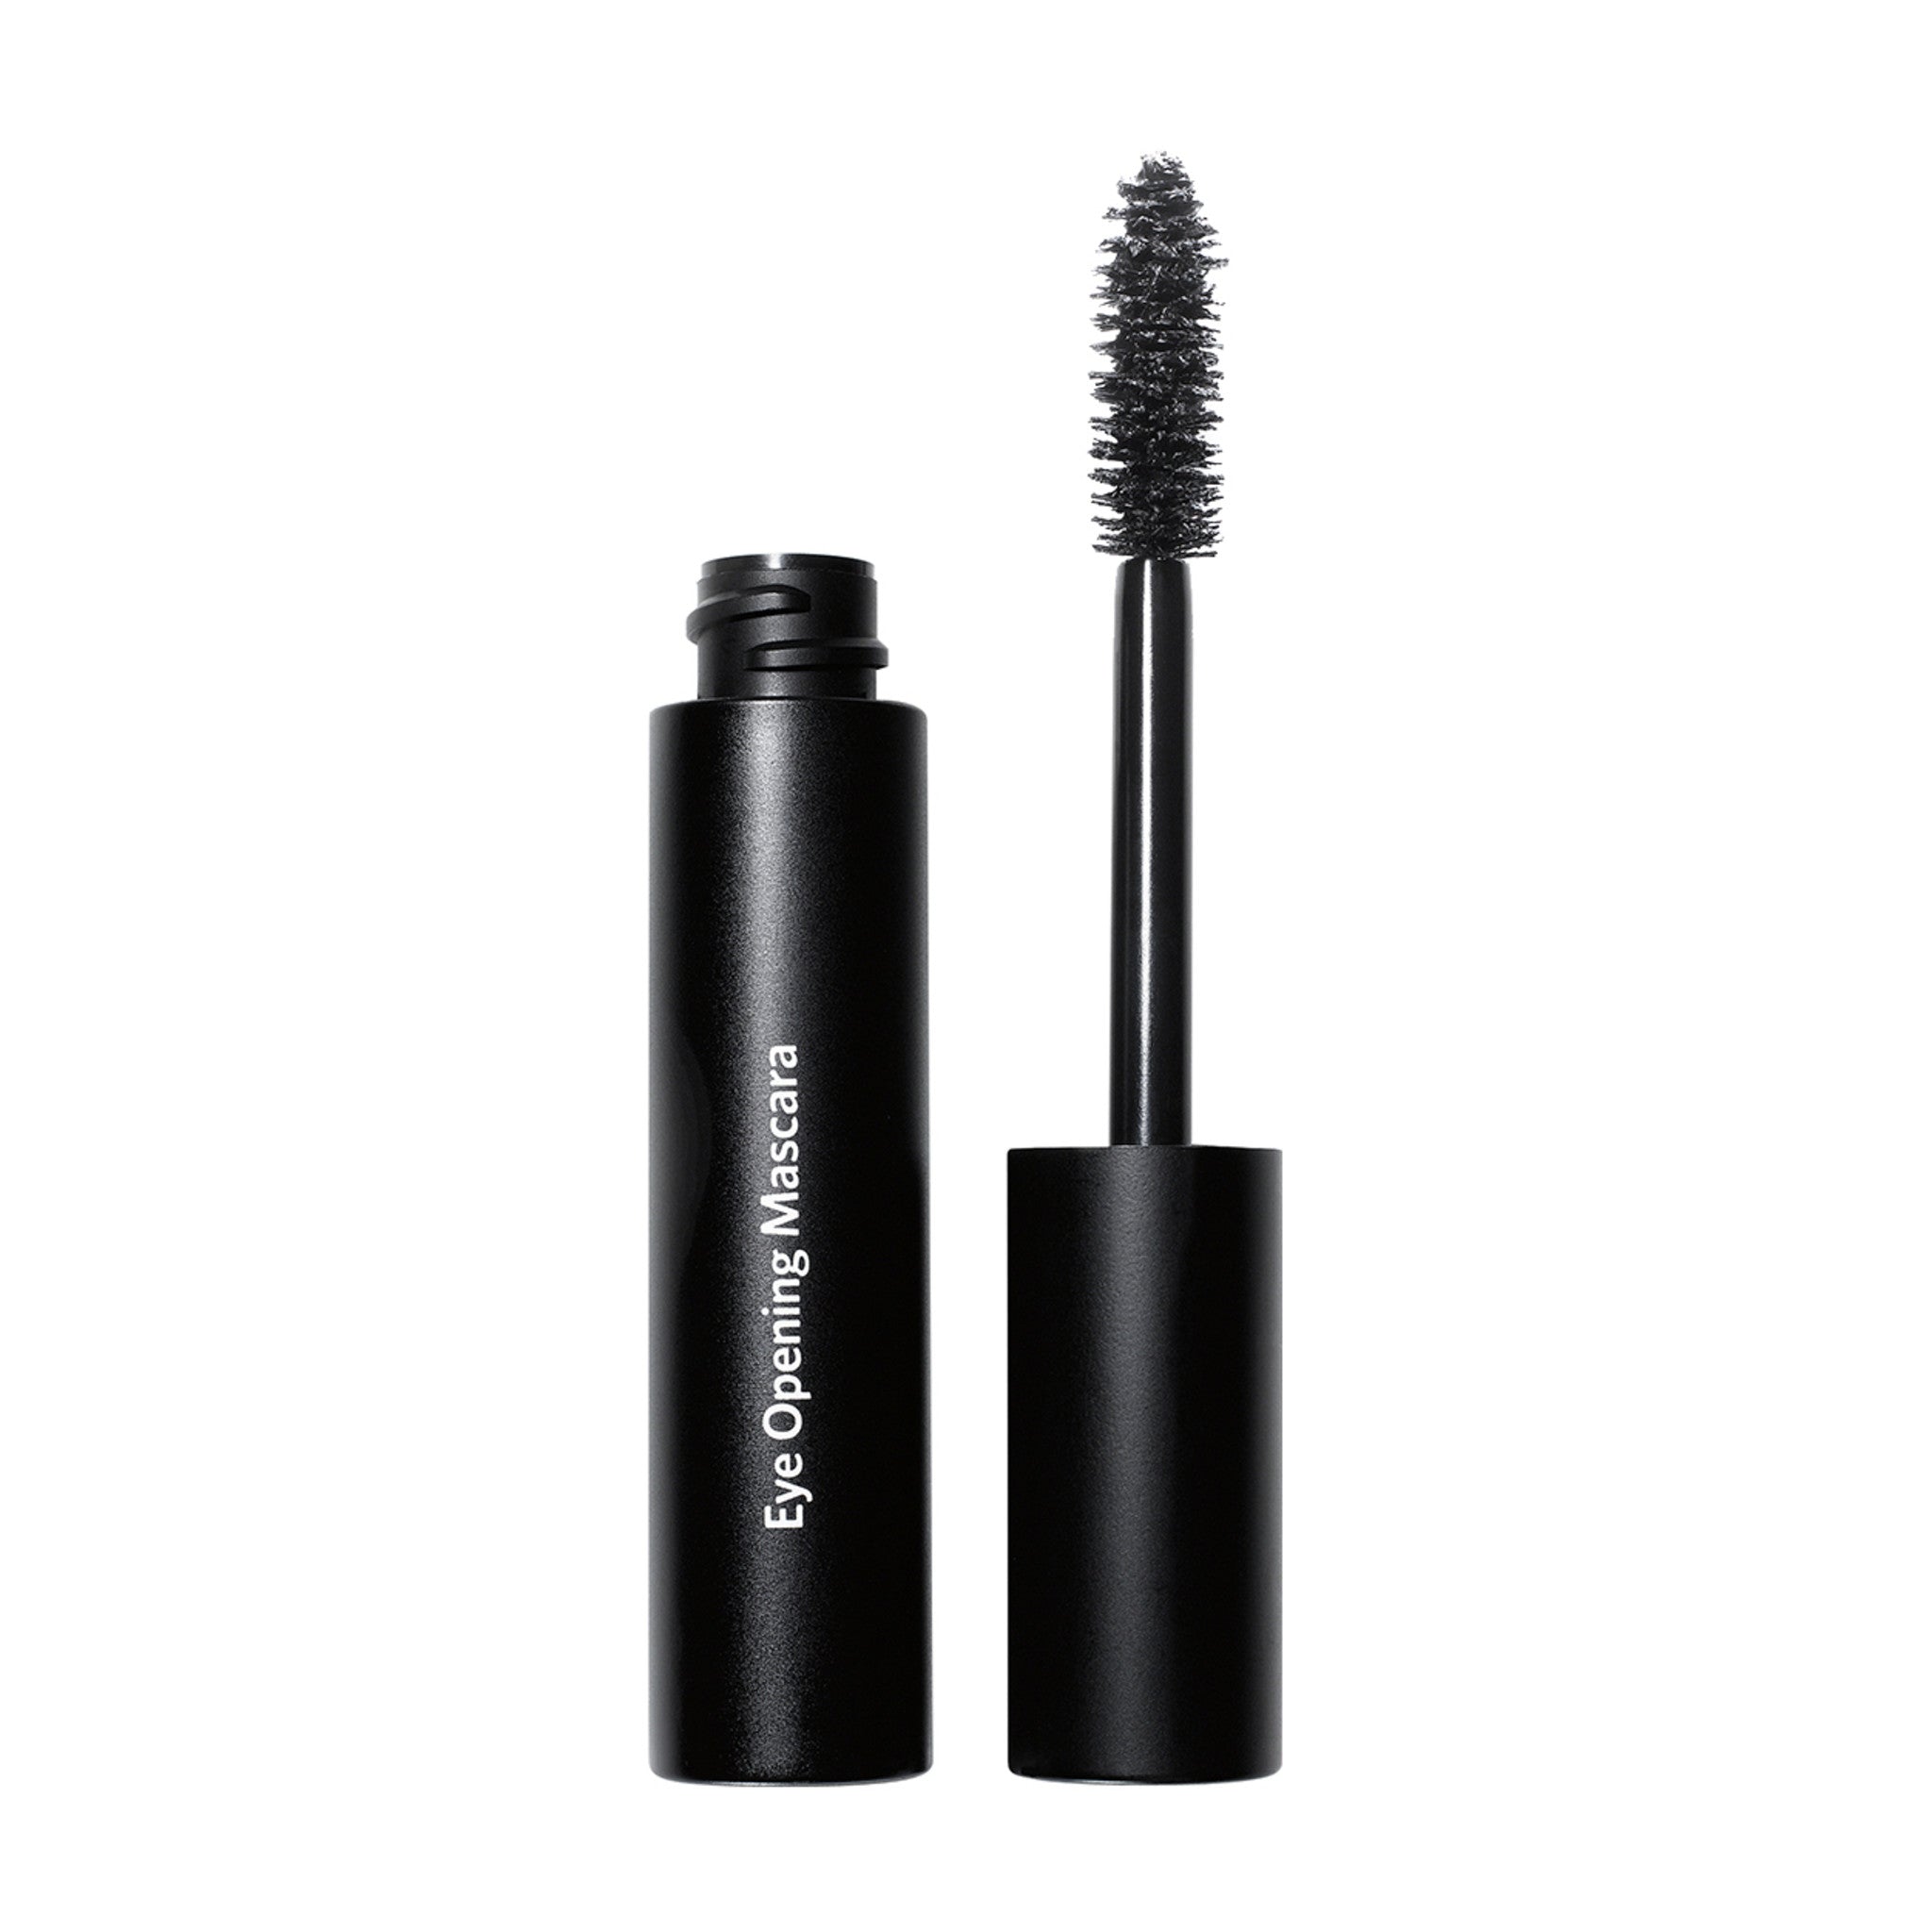 Bobbi Brown Eye Opening Mascara main image. This product is in the color black